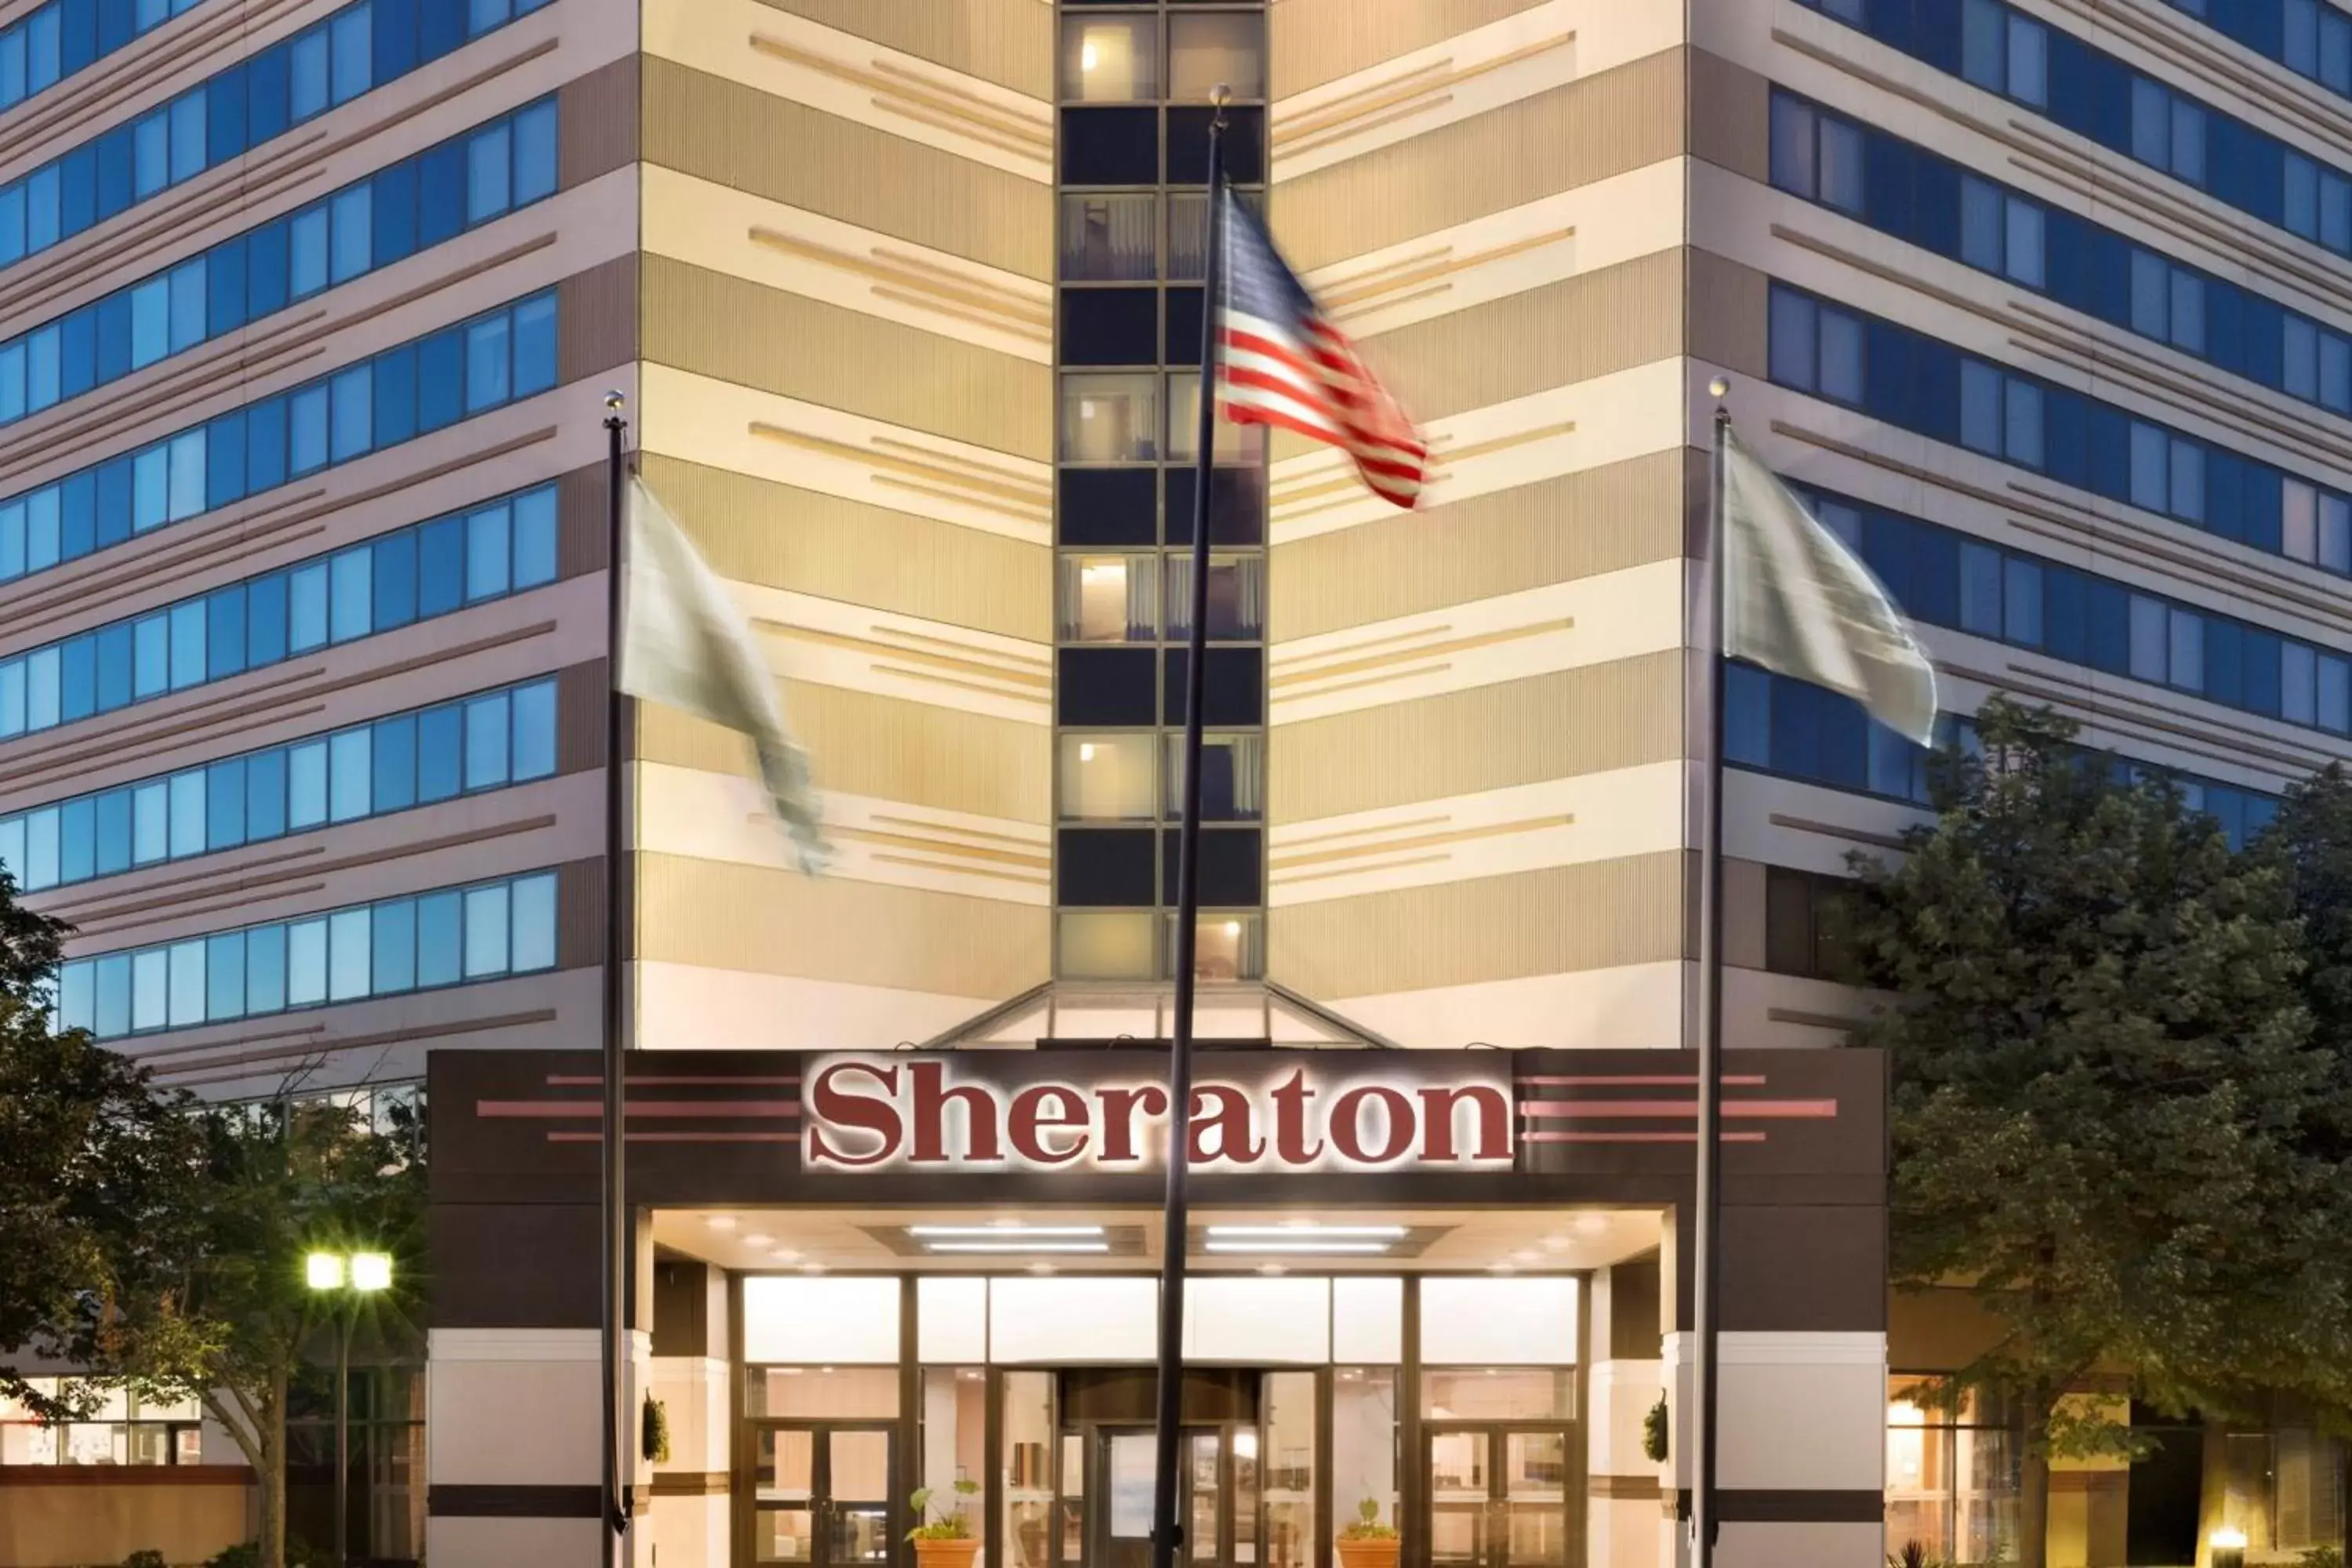 Property Building in Sheraton Suites Chicago O'Hare